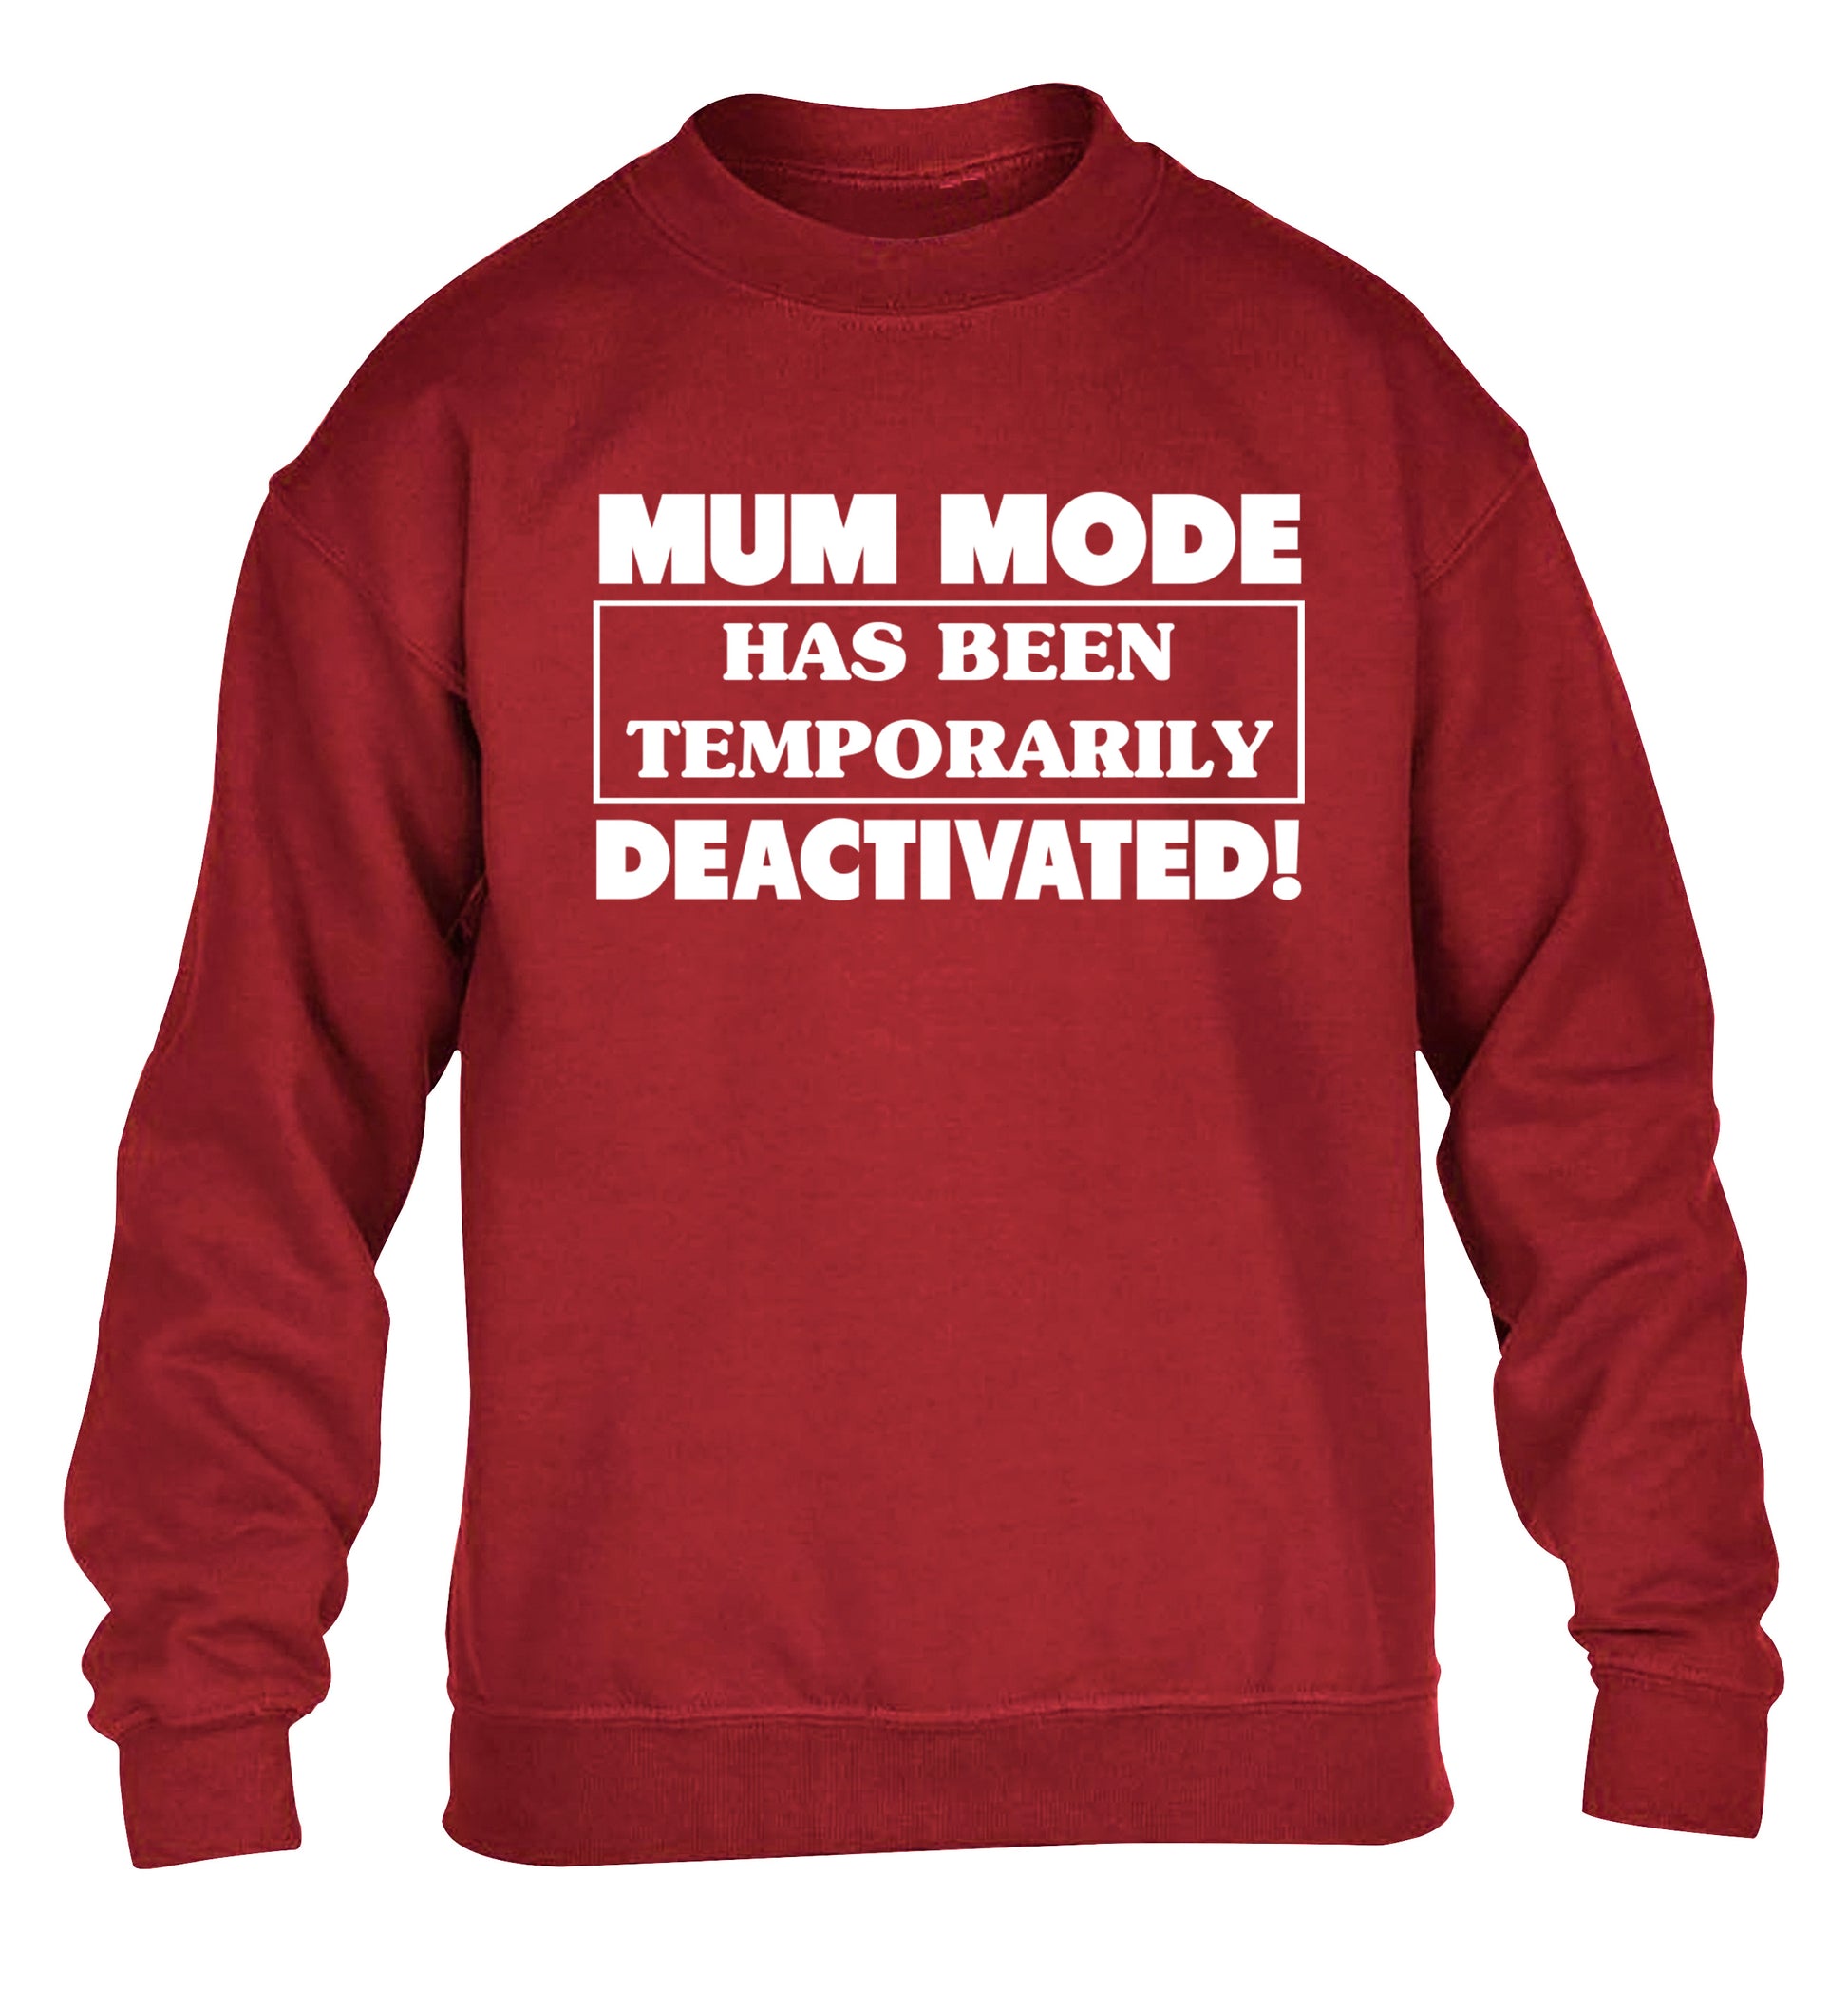 Mum mode has been temporarily deactivated! children's grey sweater 12-13 Years